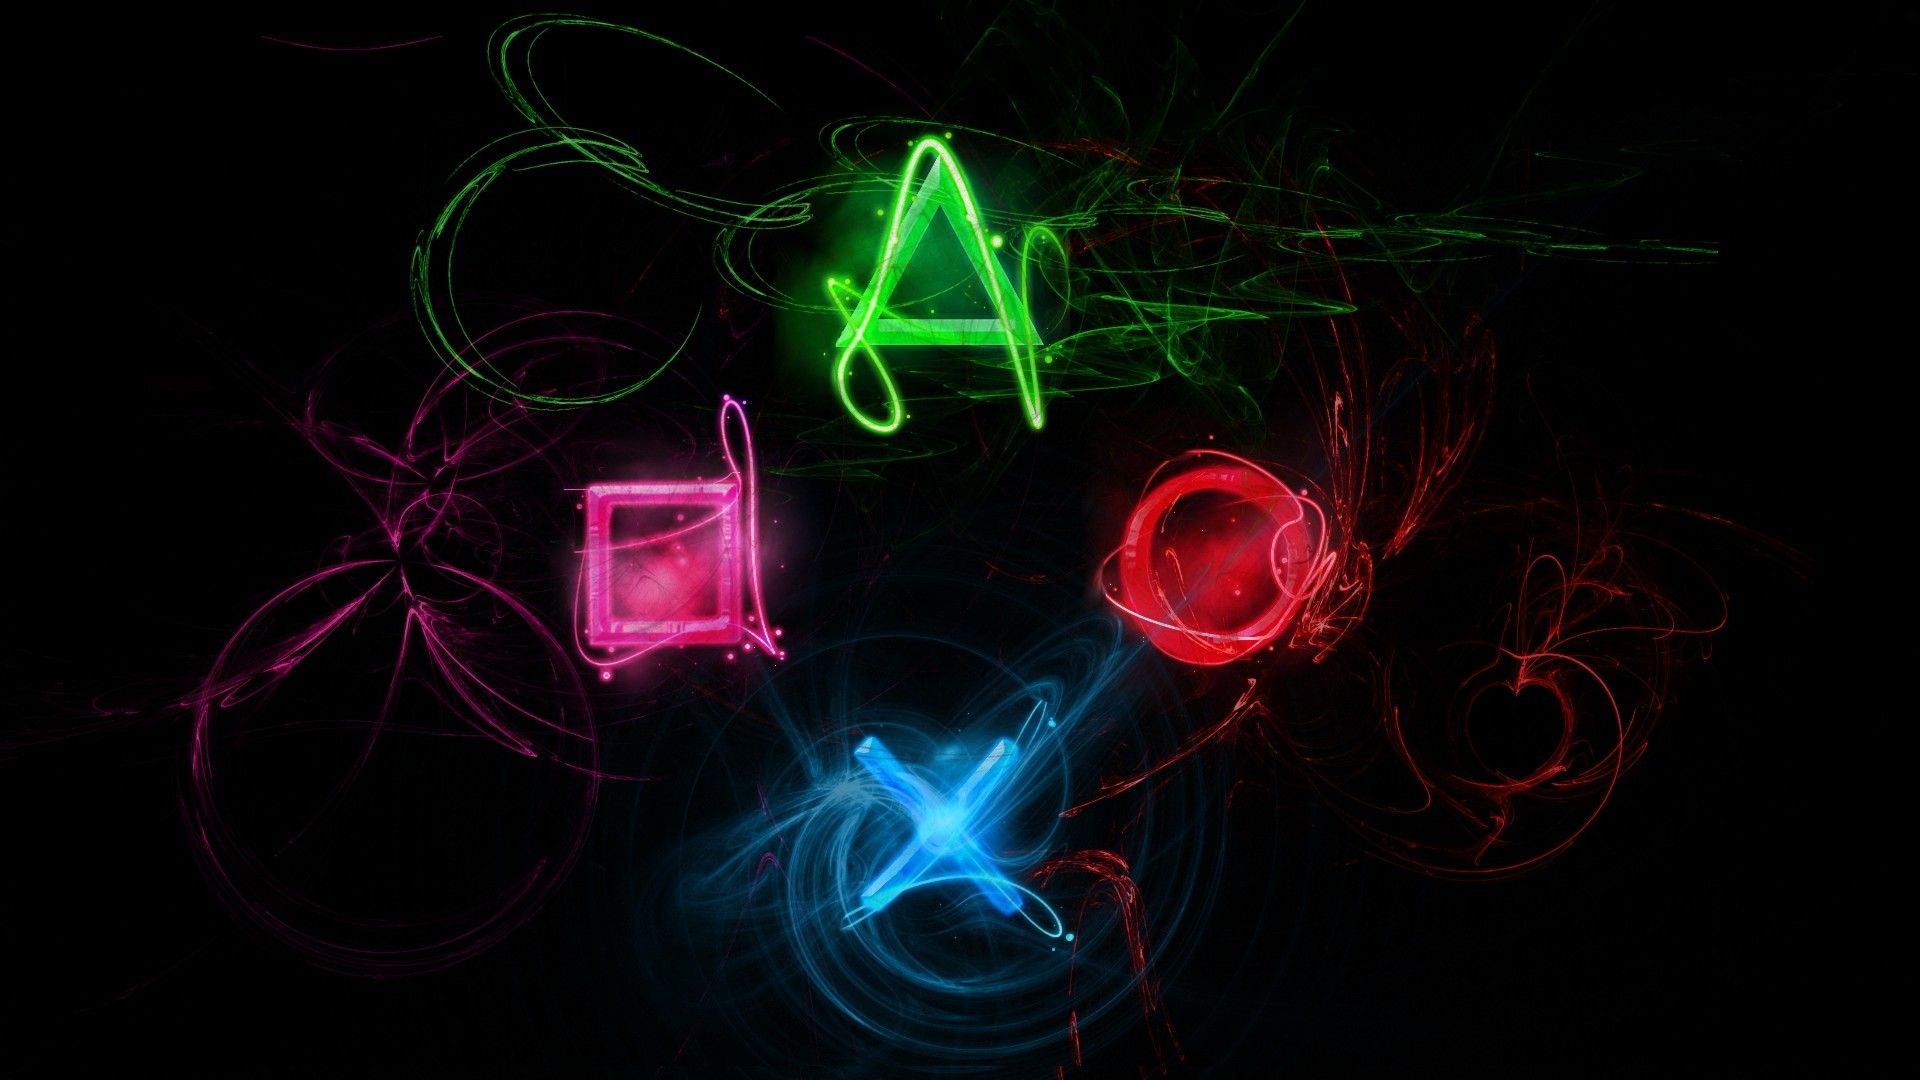 Best PS4 Wallpapers on WallpaperDog